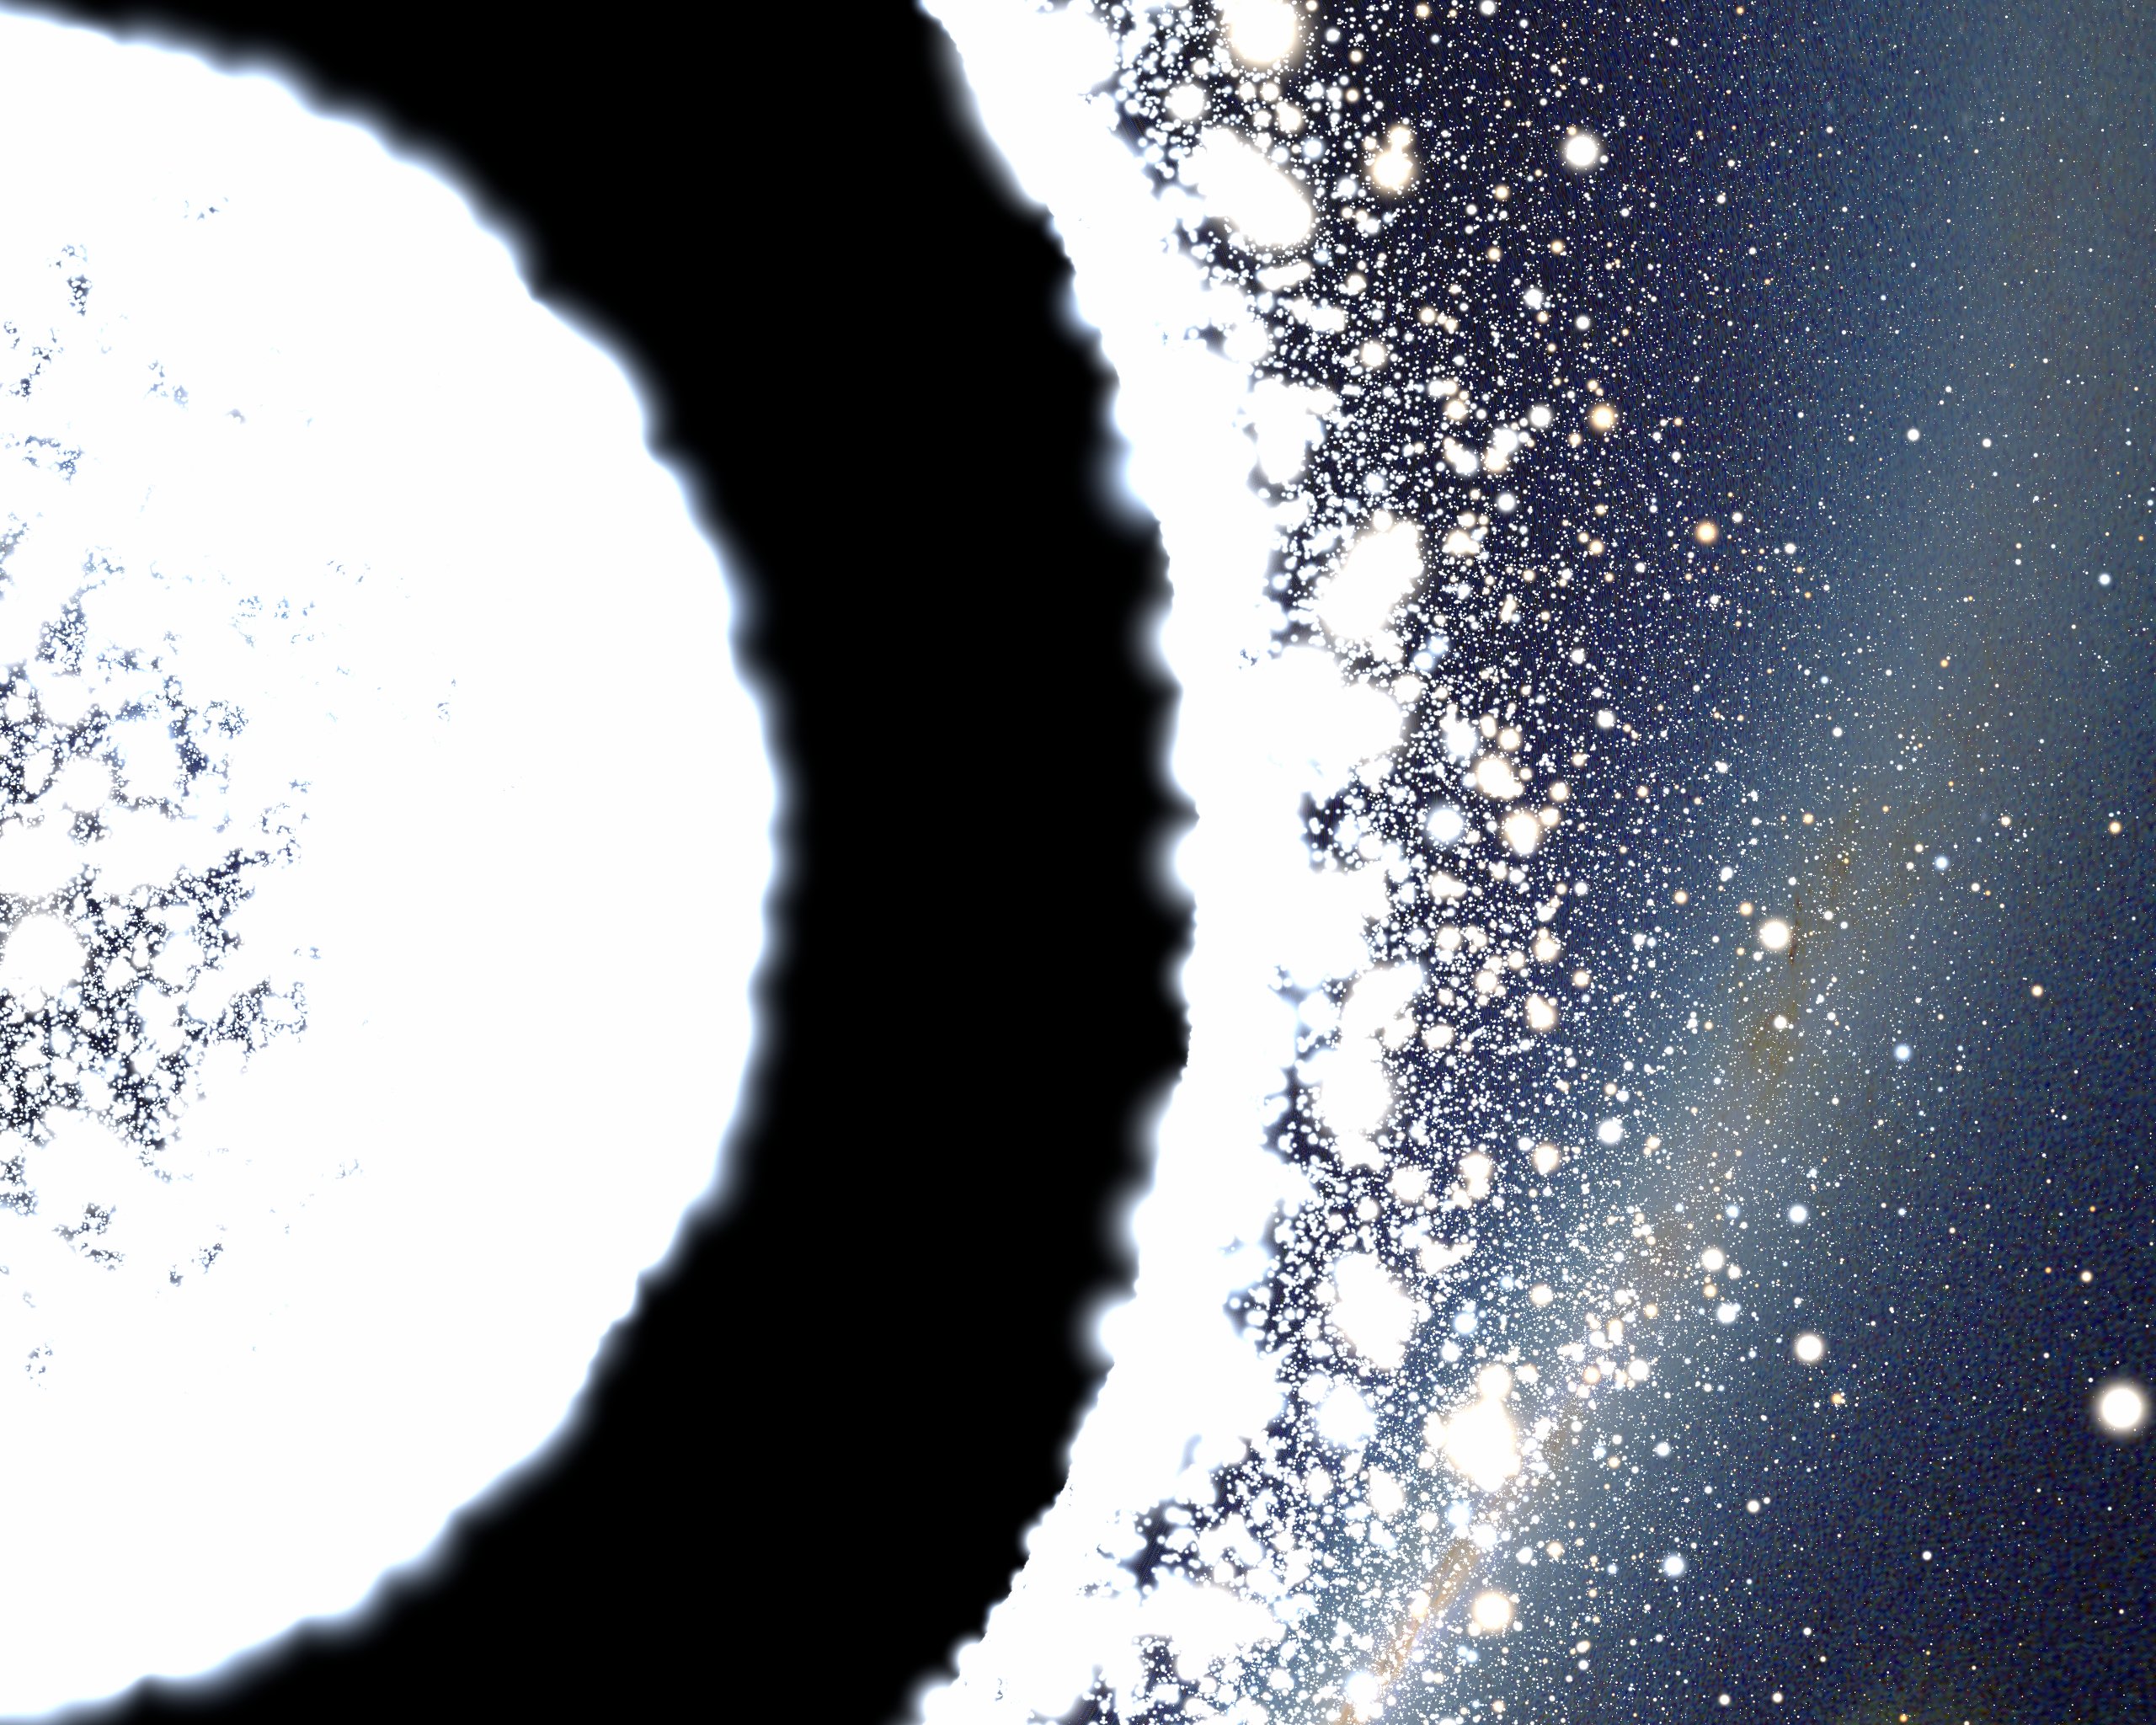 event, Horizon, Sci fi, Horror, Abstract, Space, Black, Hole Wallpaper